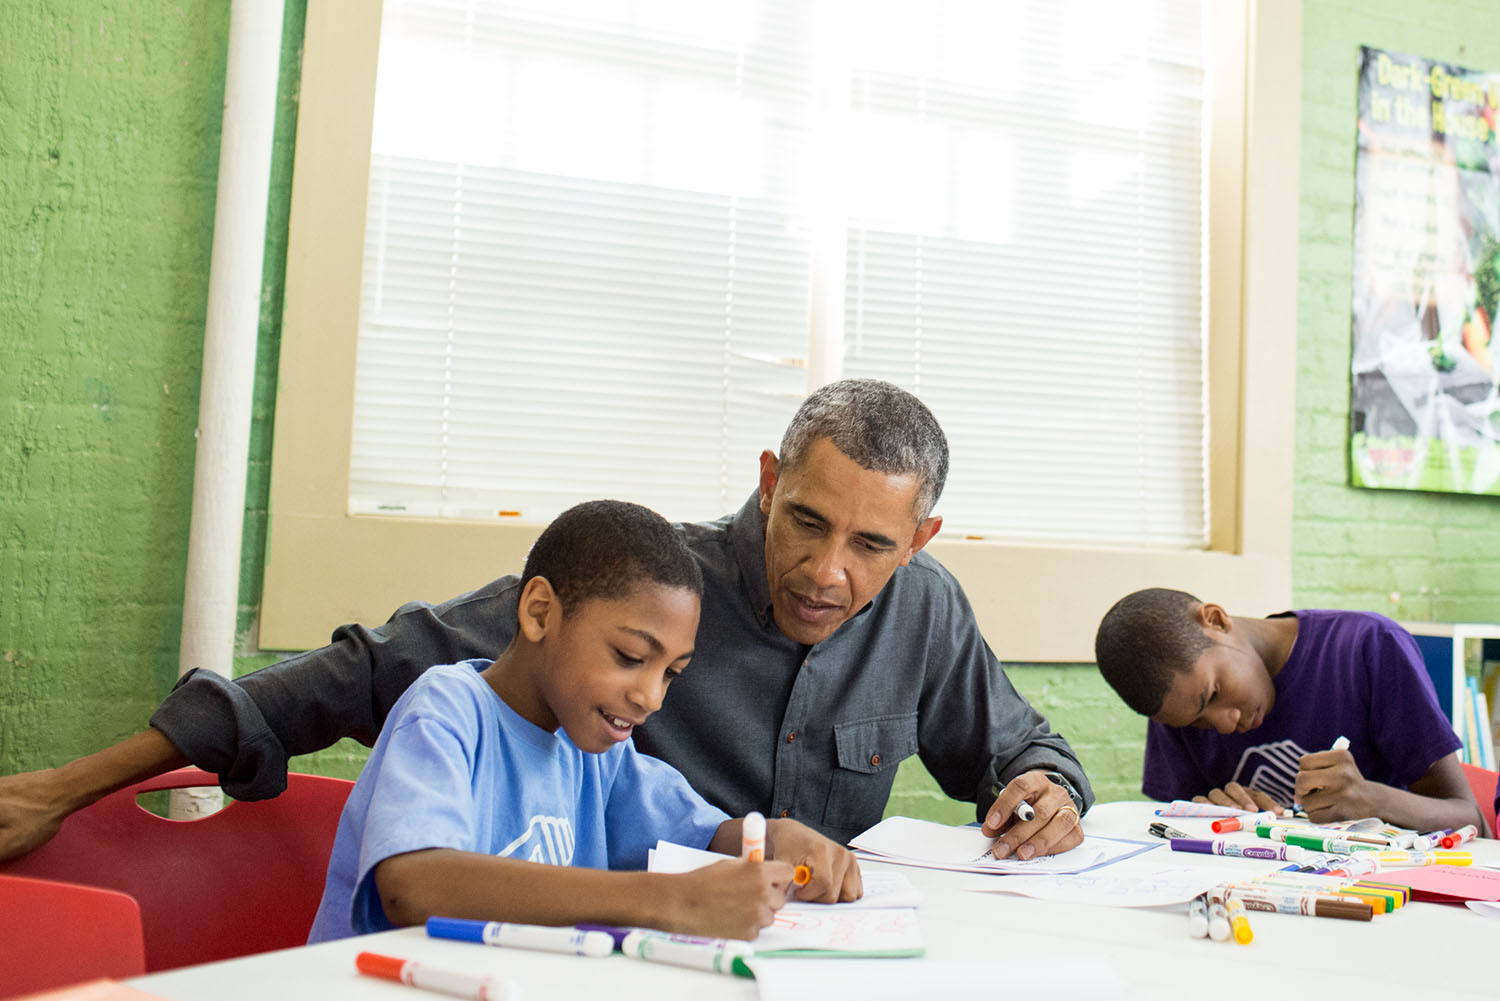 President Obama works with young boys during a community service project at the Boys & Girls Club of Greater Washington